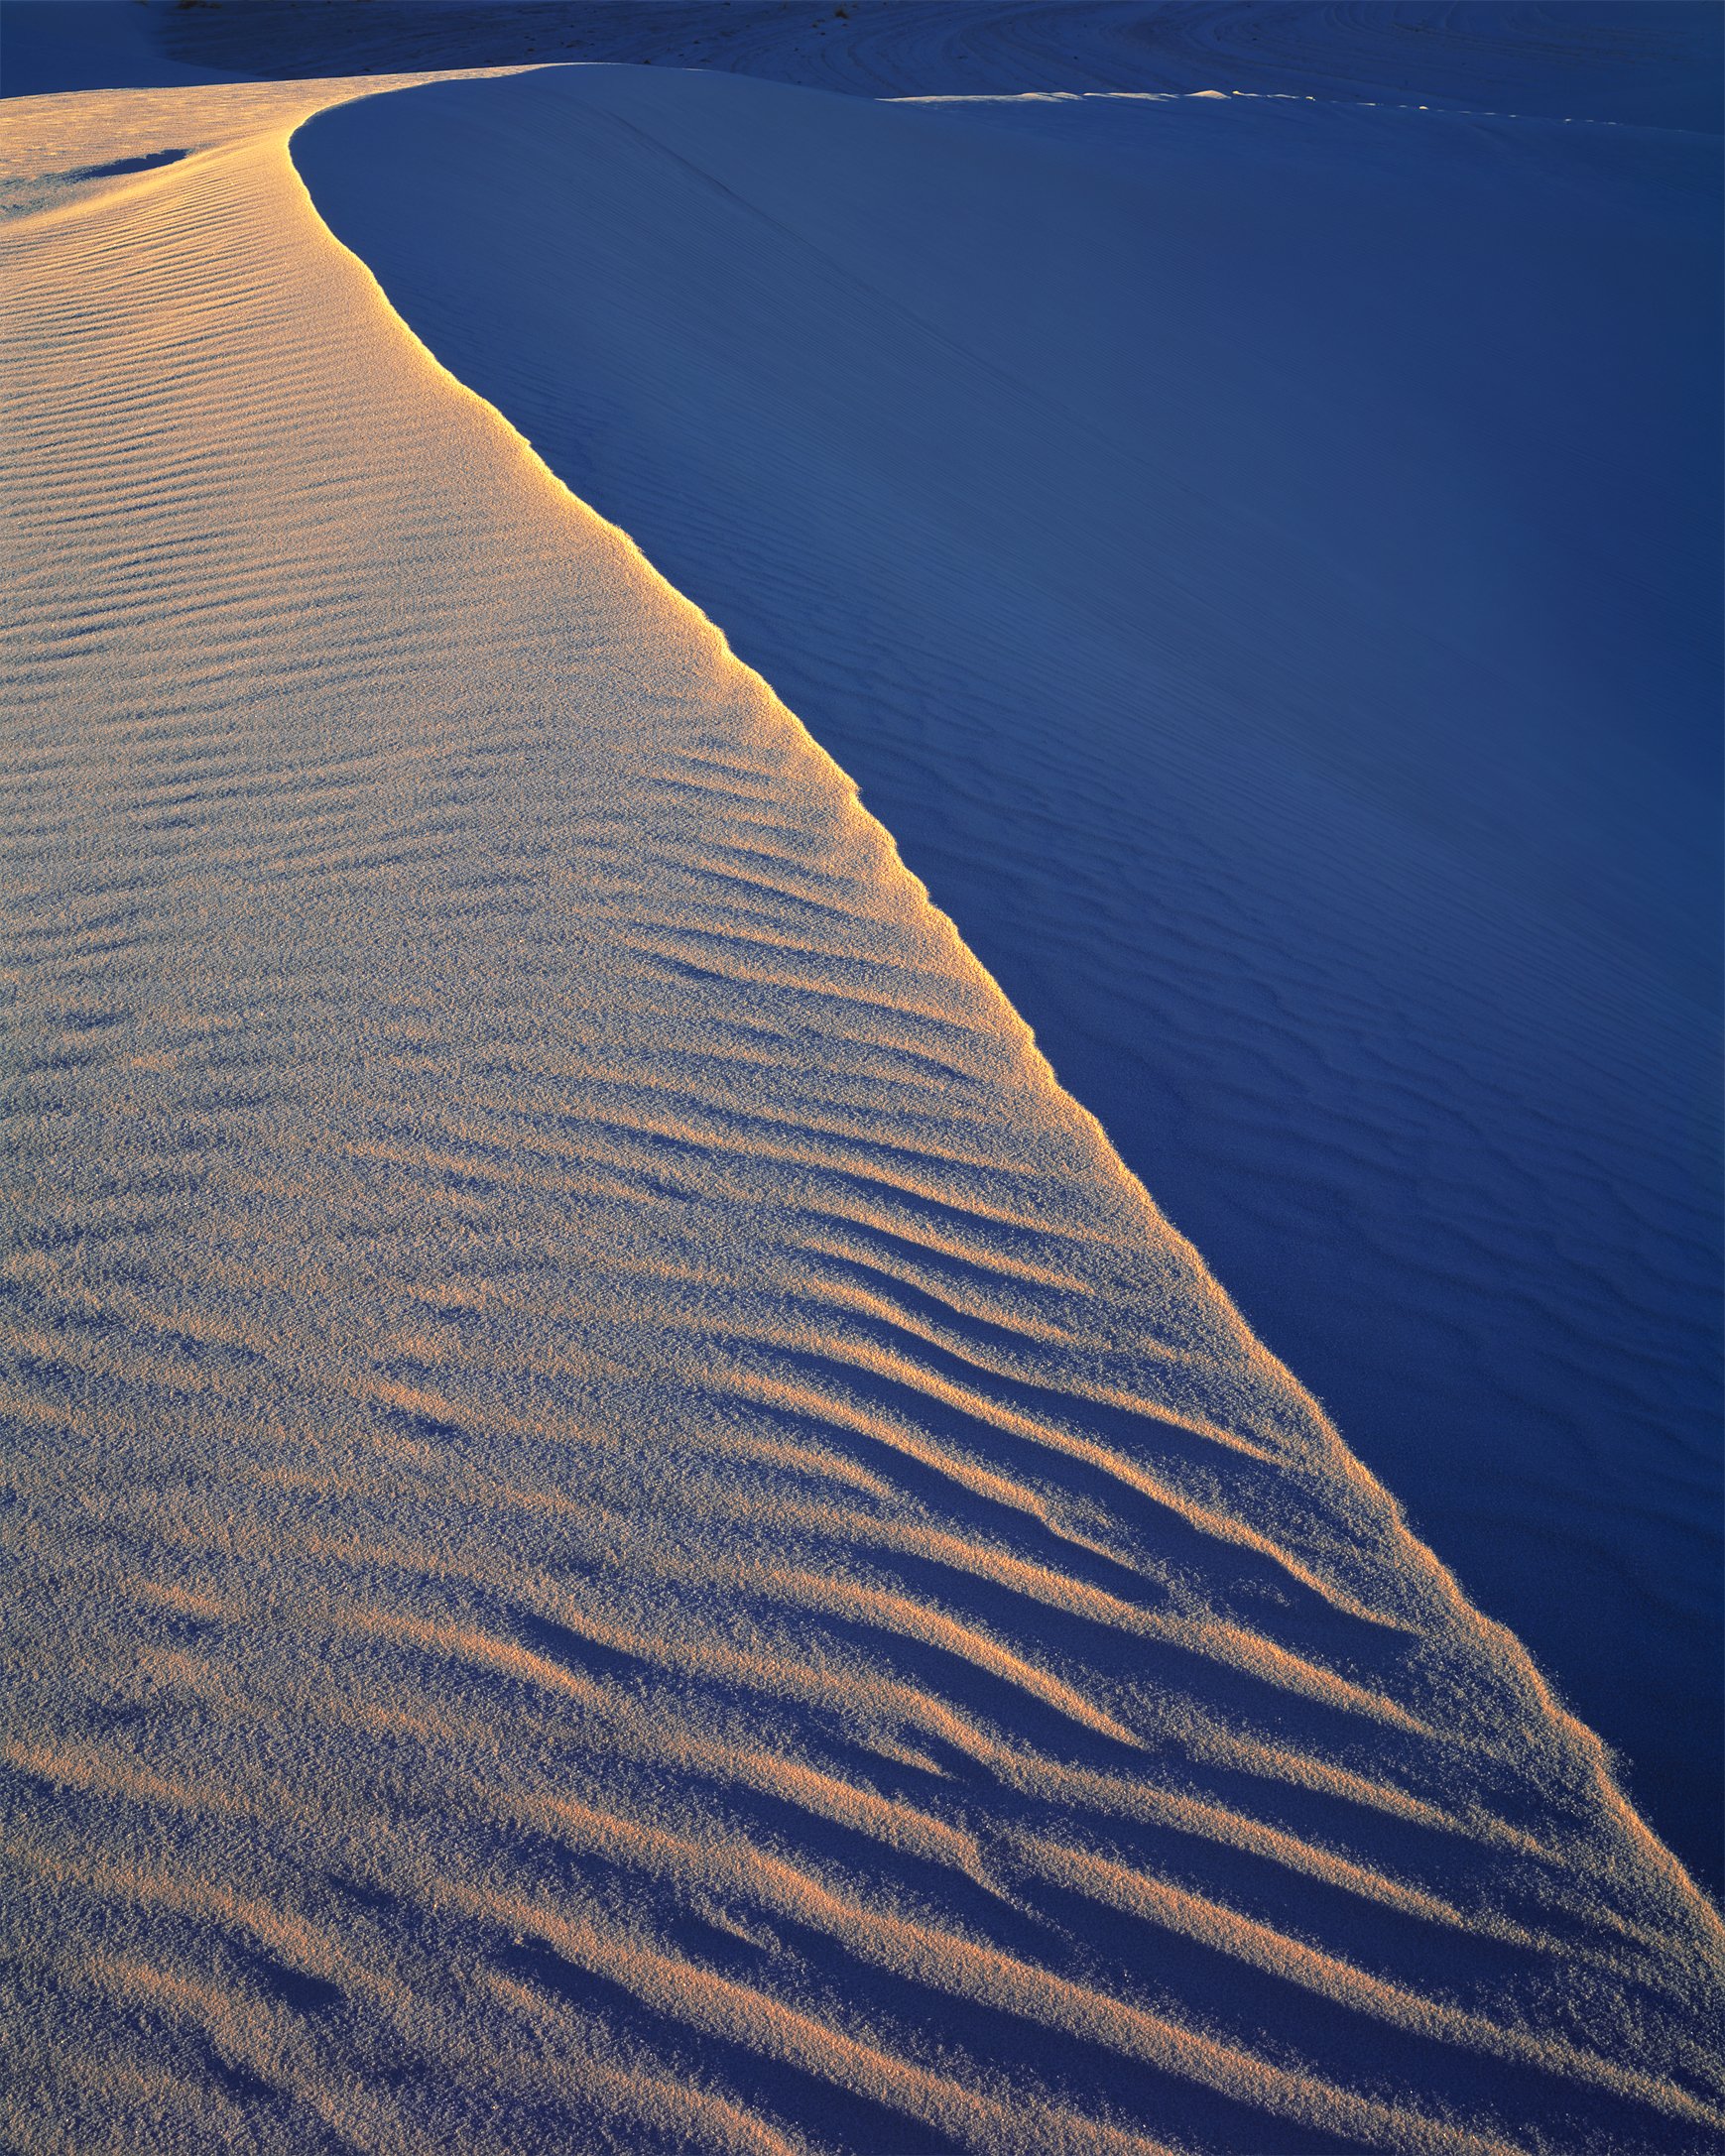   White Sands National Park, New Mexico, 2021 . Fuji Provia 100f 8x10 Large Format Film  